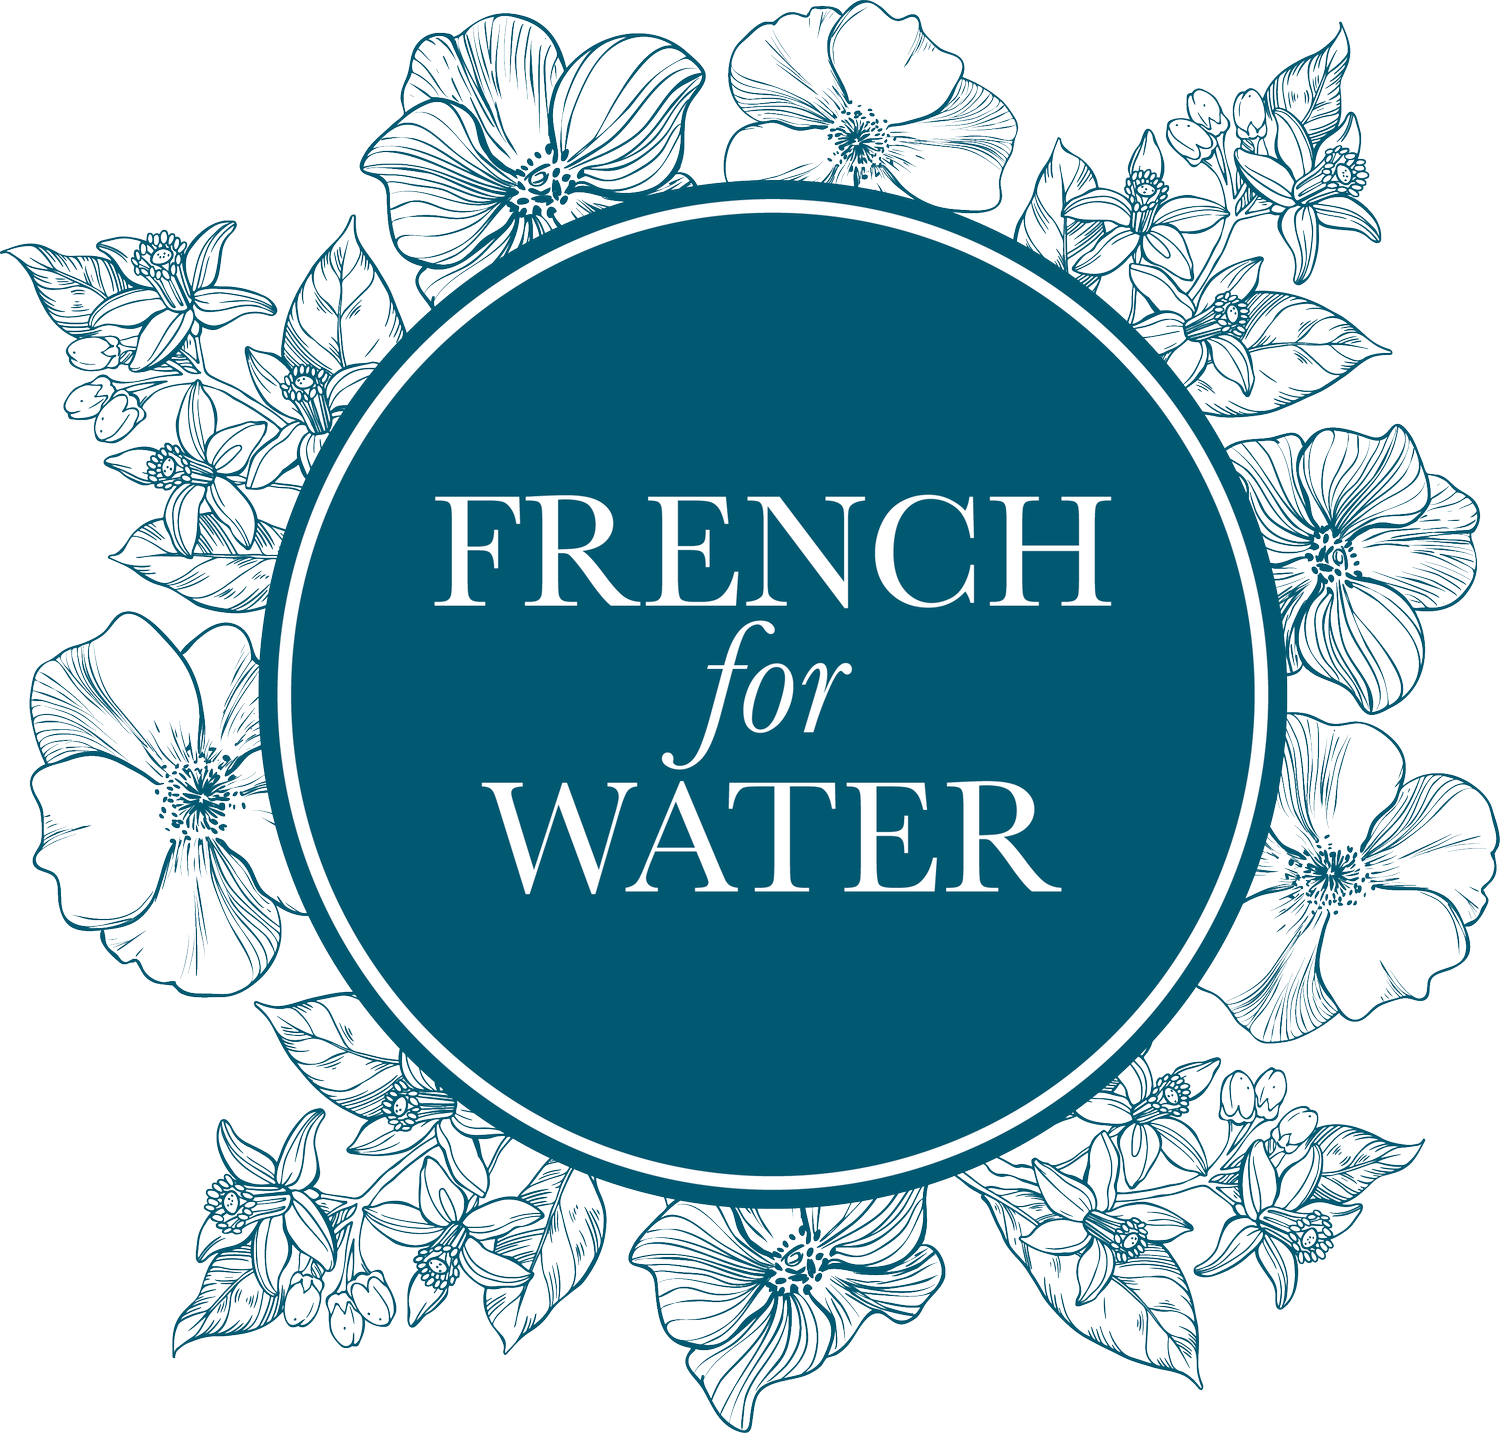 French for Water